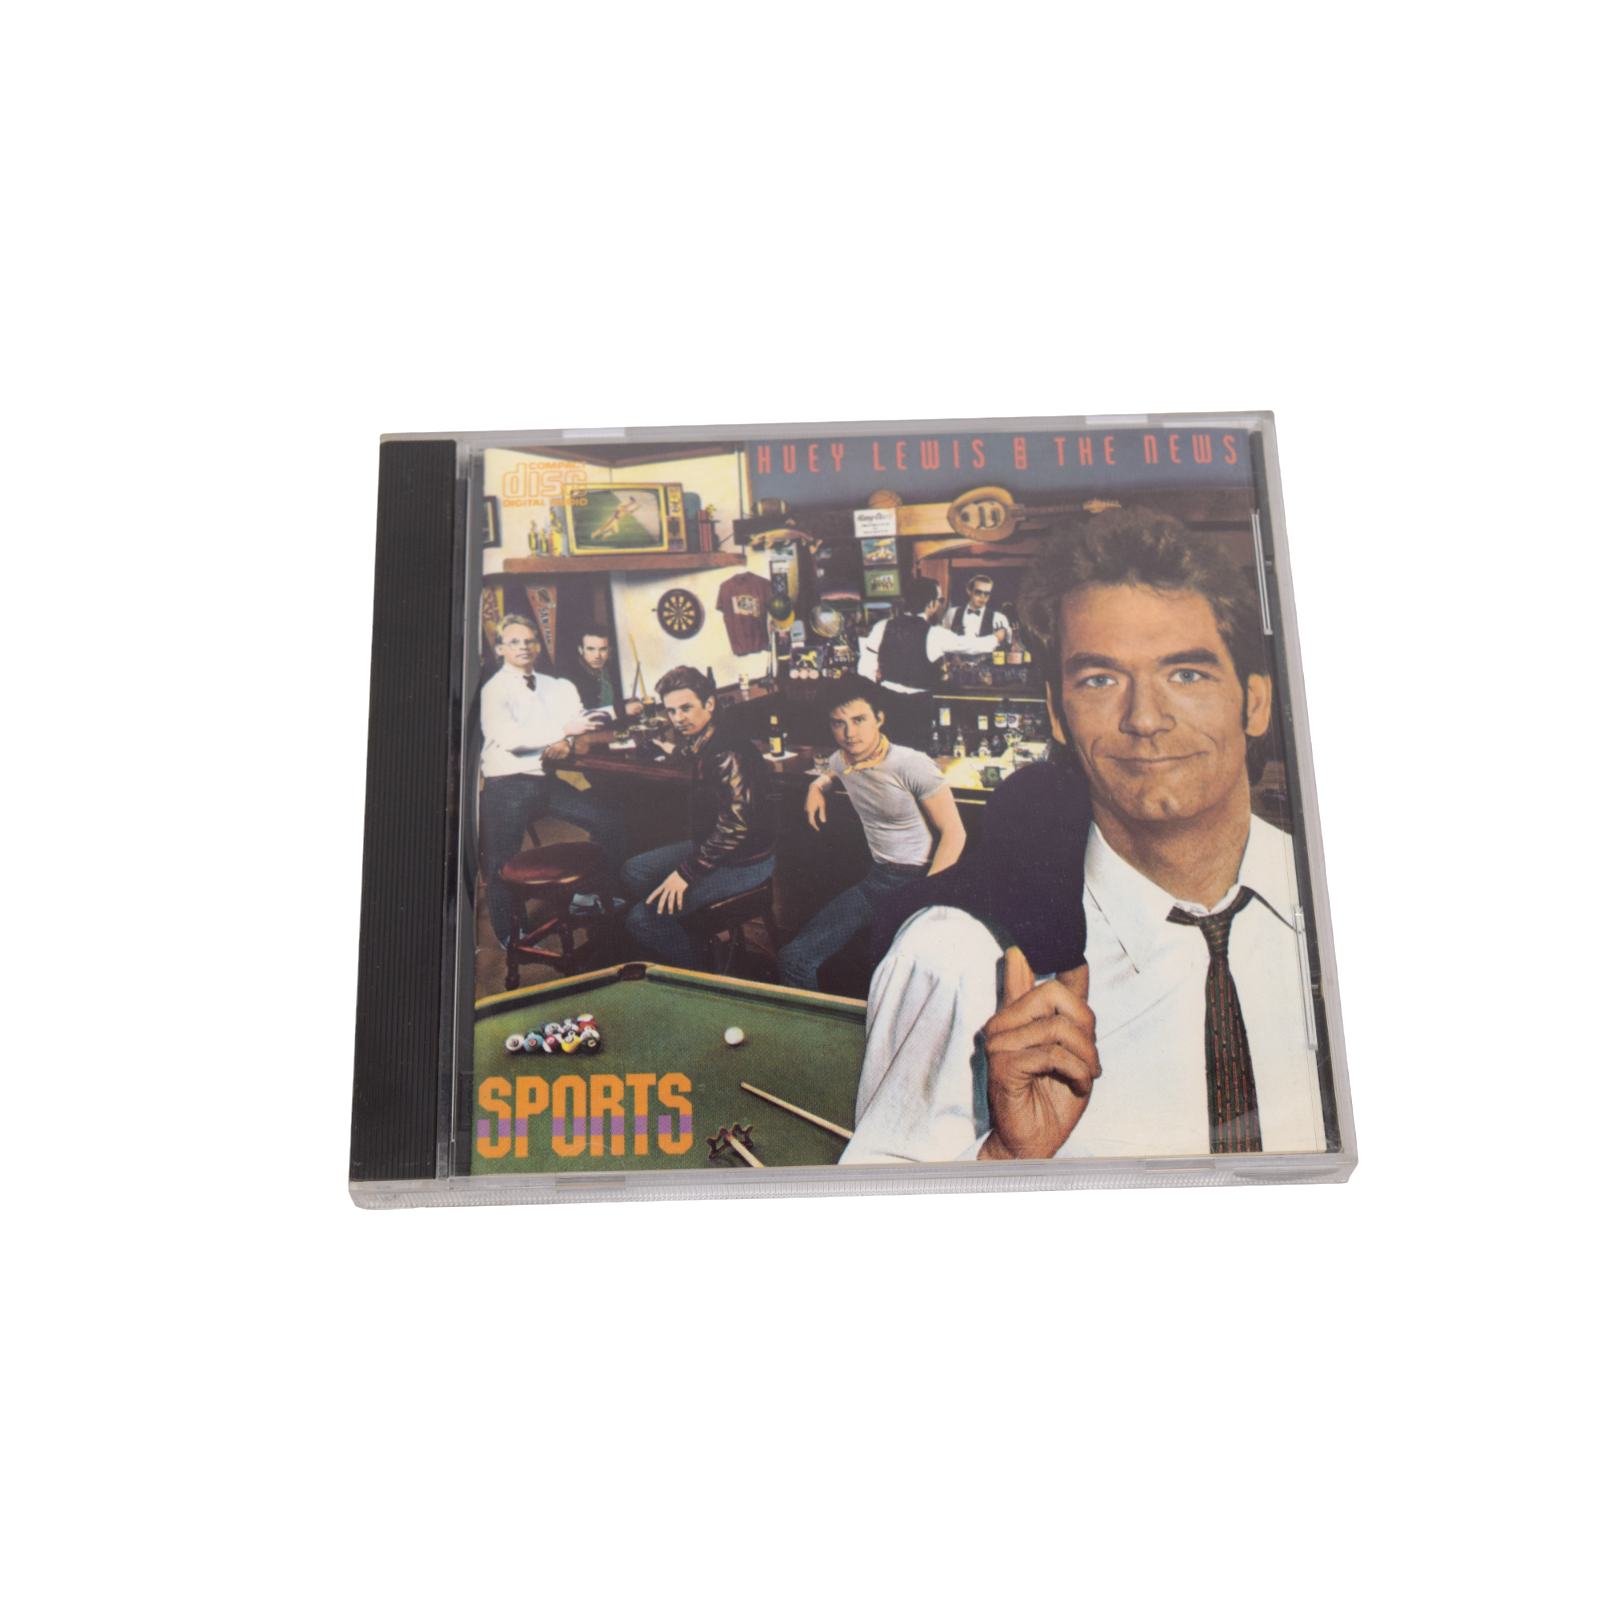 Primary image for Sports by Huey Lewis & the News (CD, 1999, Capitol)